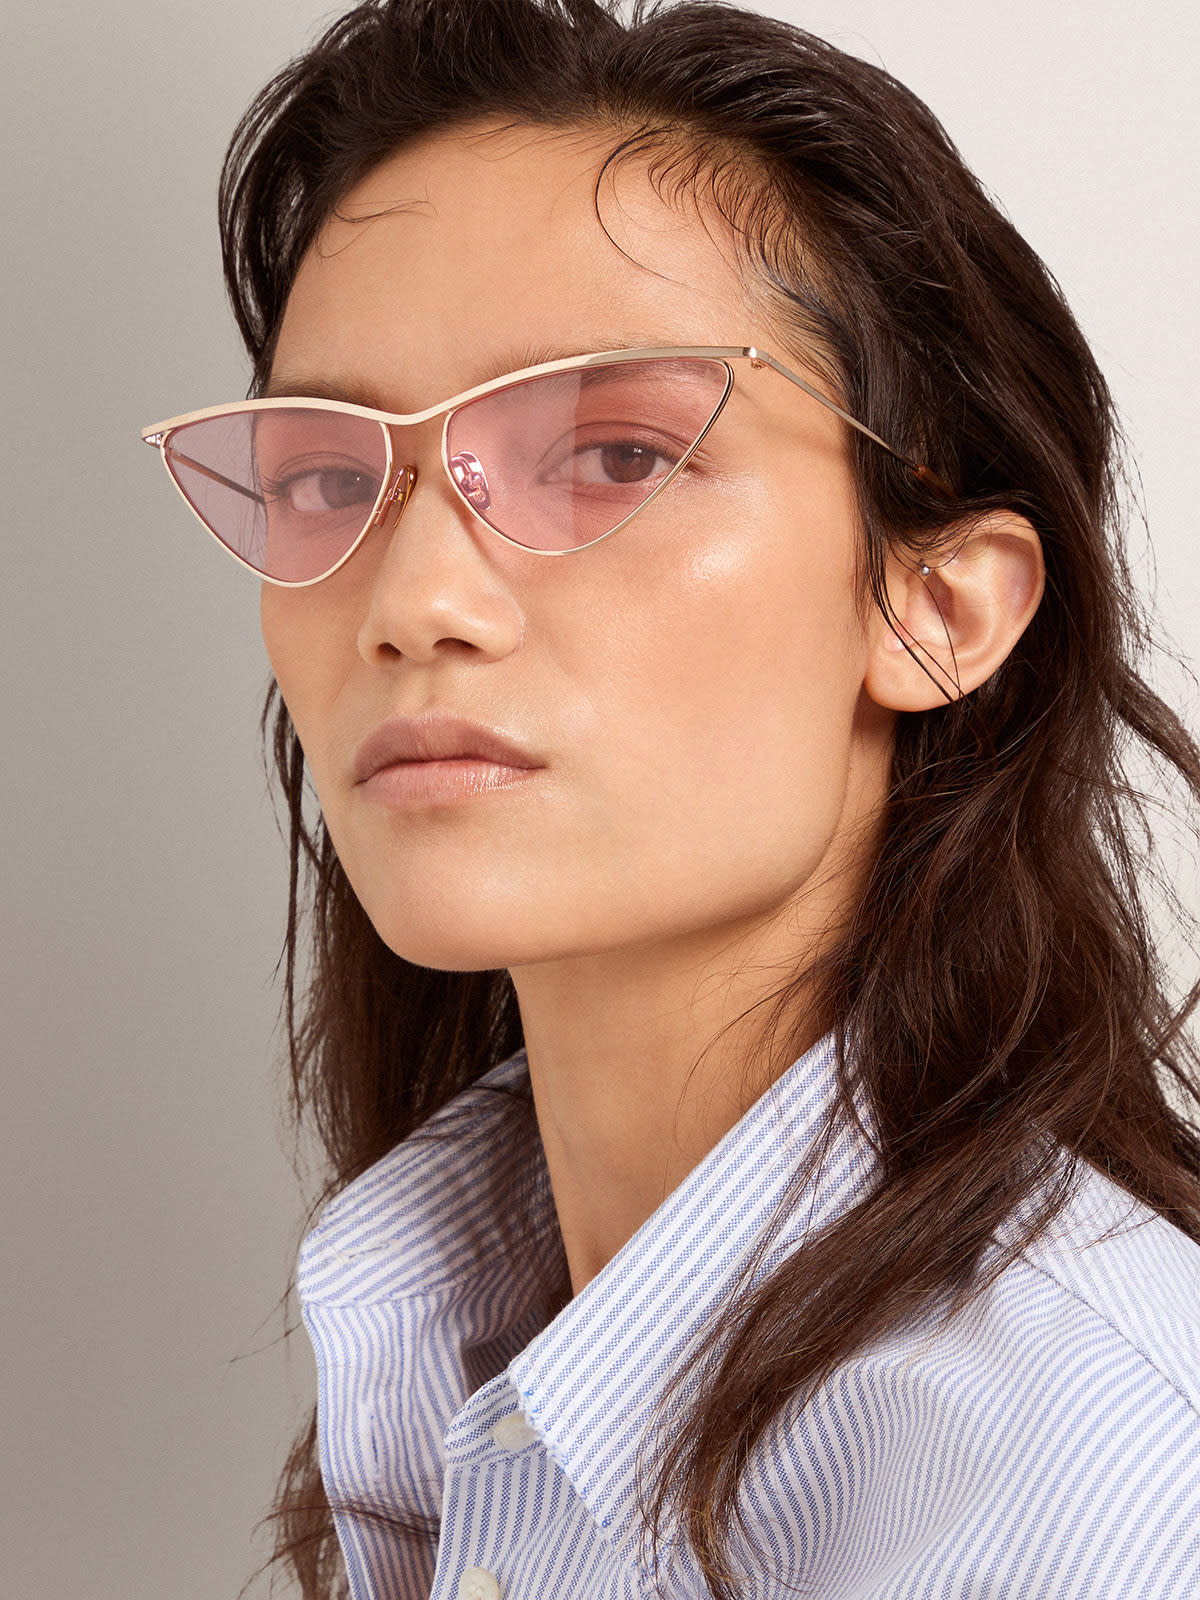 Golden Goose - Sunframe cat-eye style with pink frame and lenses in 